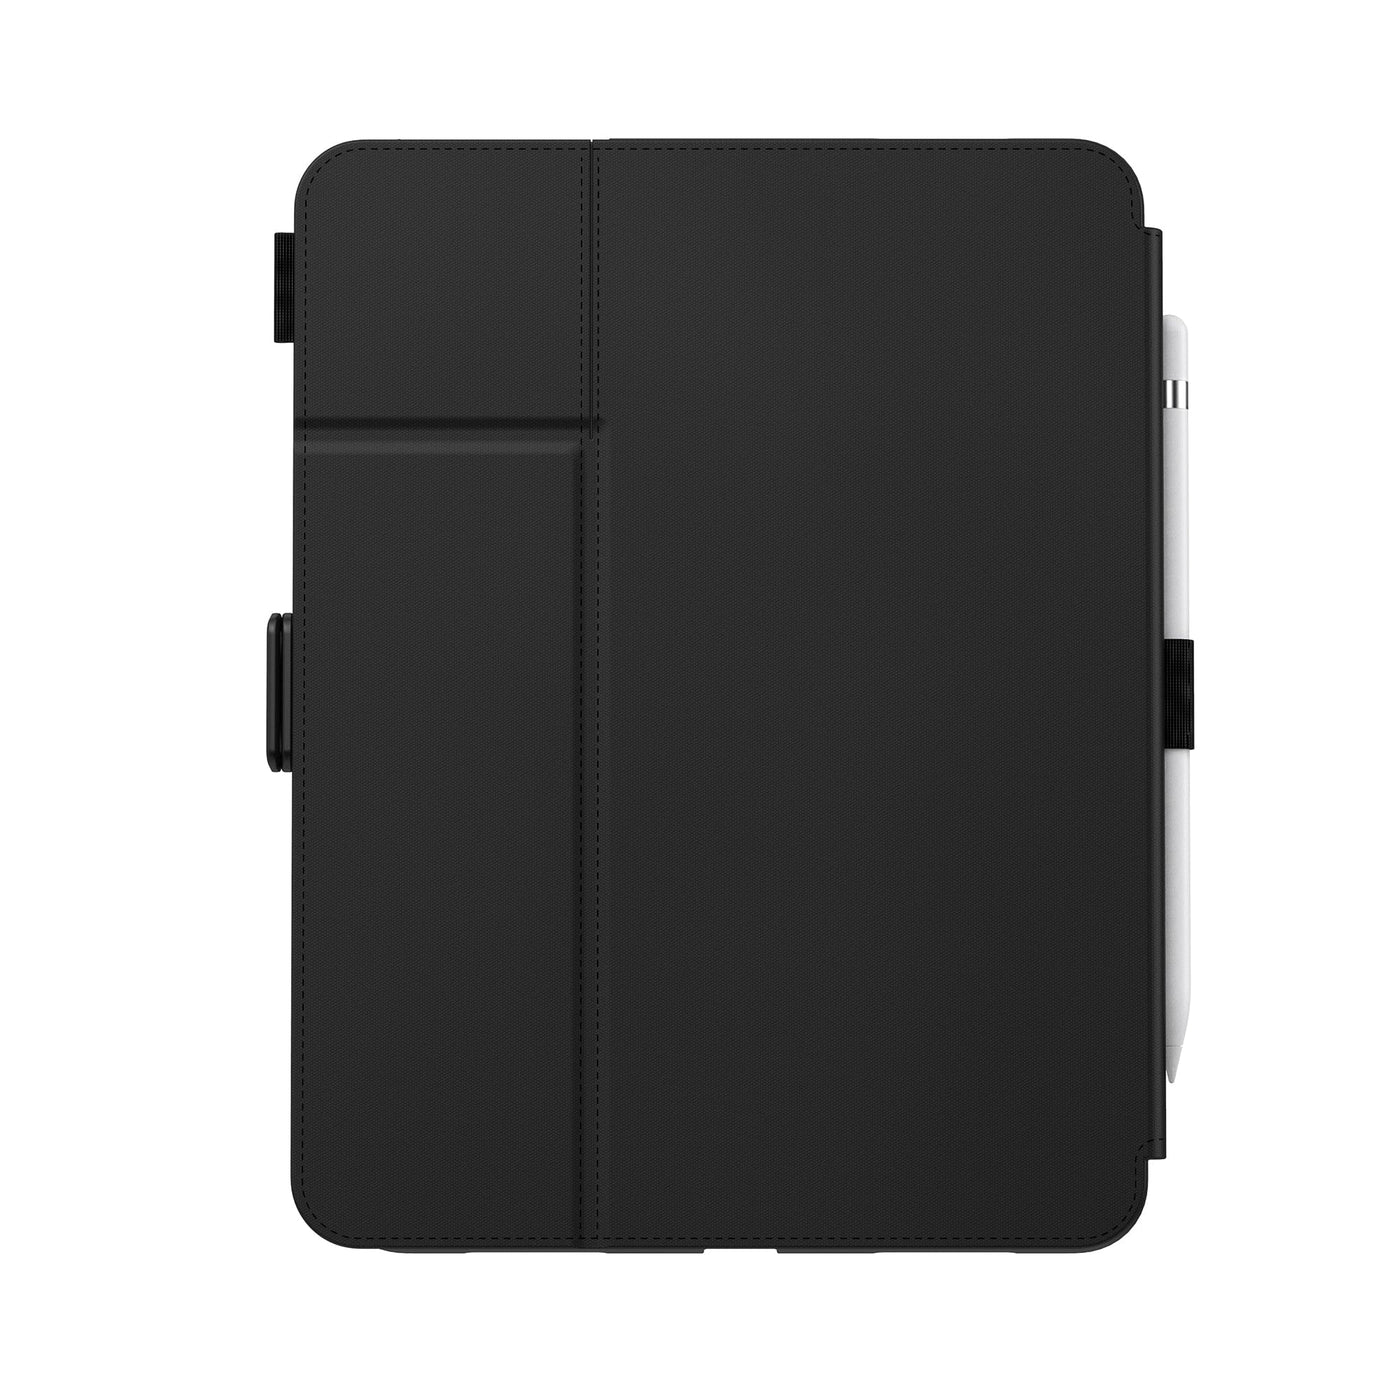 Shop Apple Ipad Case 9th Gen with great discounts and prices